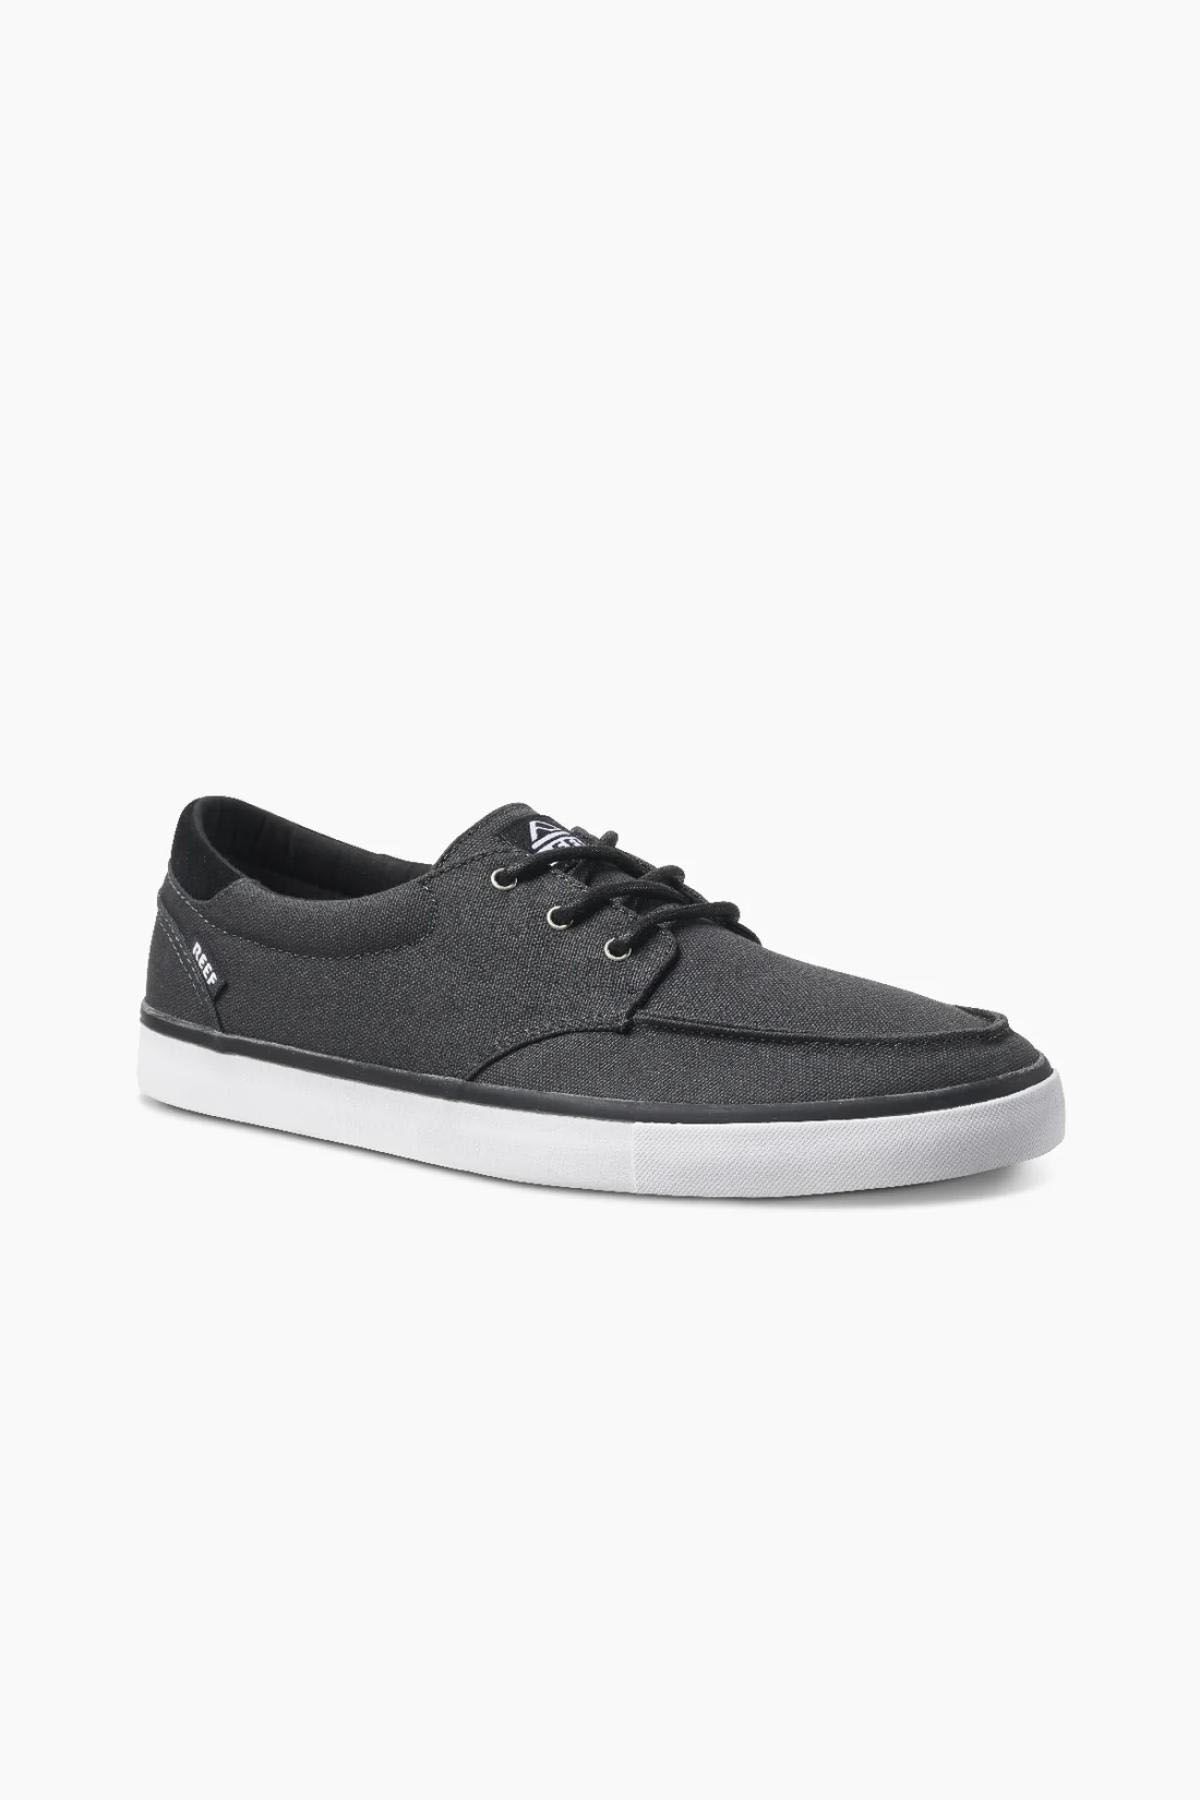 REEF Reef Deckhand 3 Black/White Men Casual Shoes